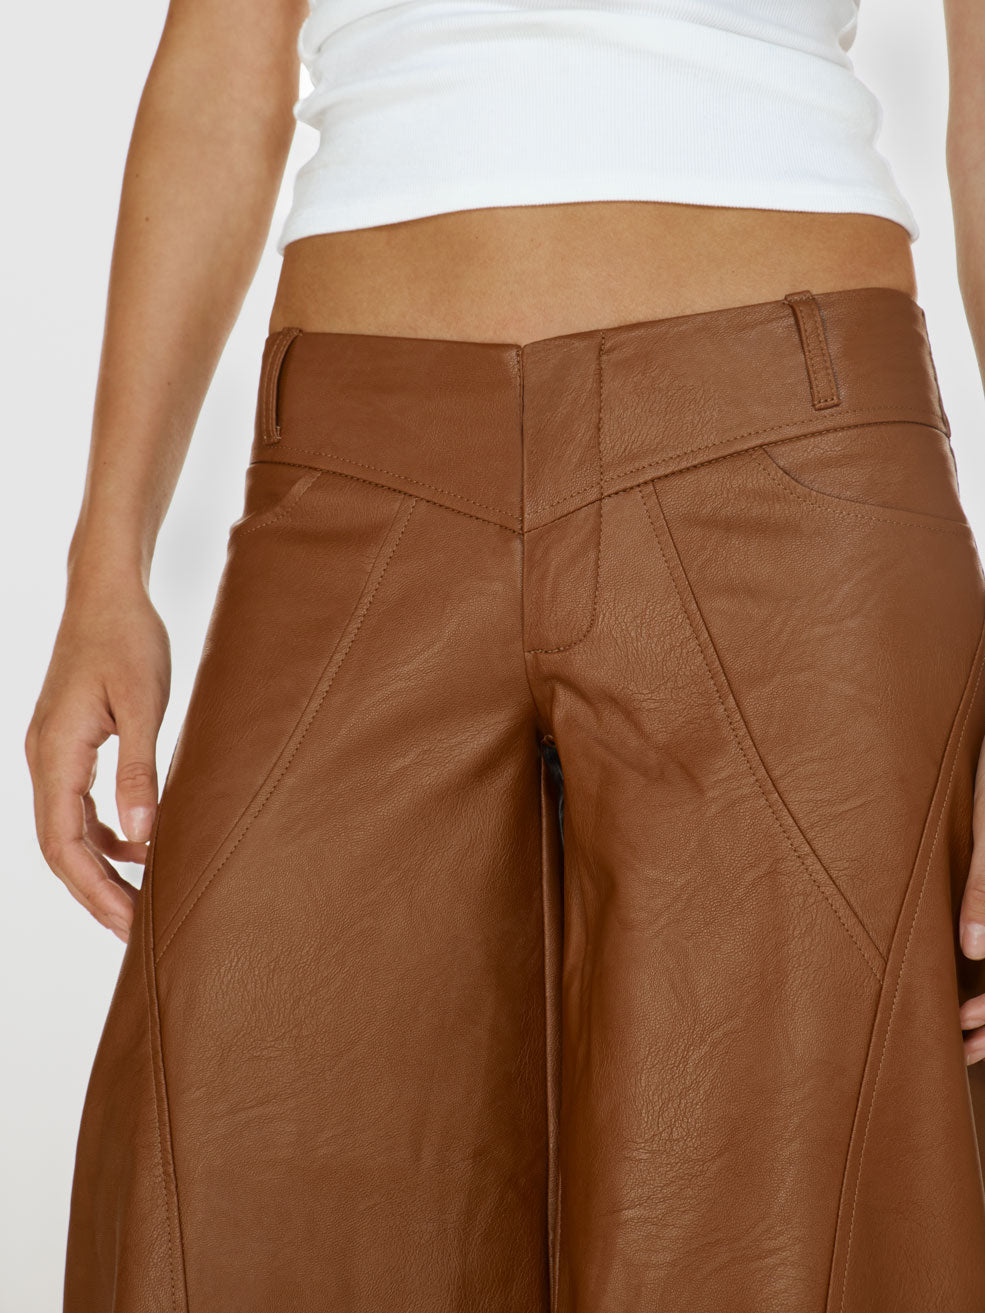 Closeup shot of a girl in a white viscose tank top and brown vegan leather low rise wide leg pants